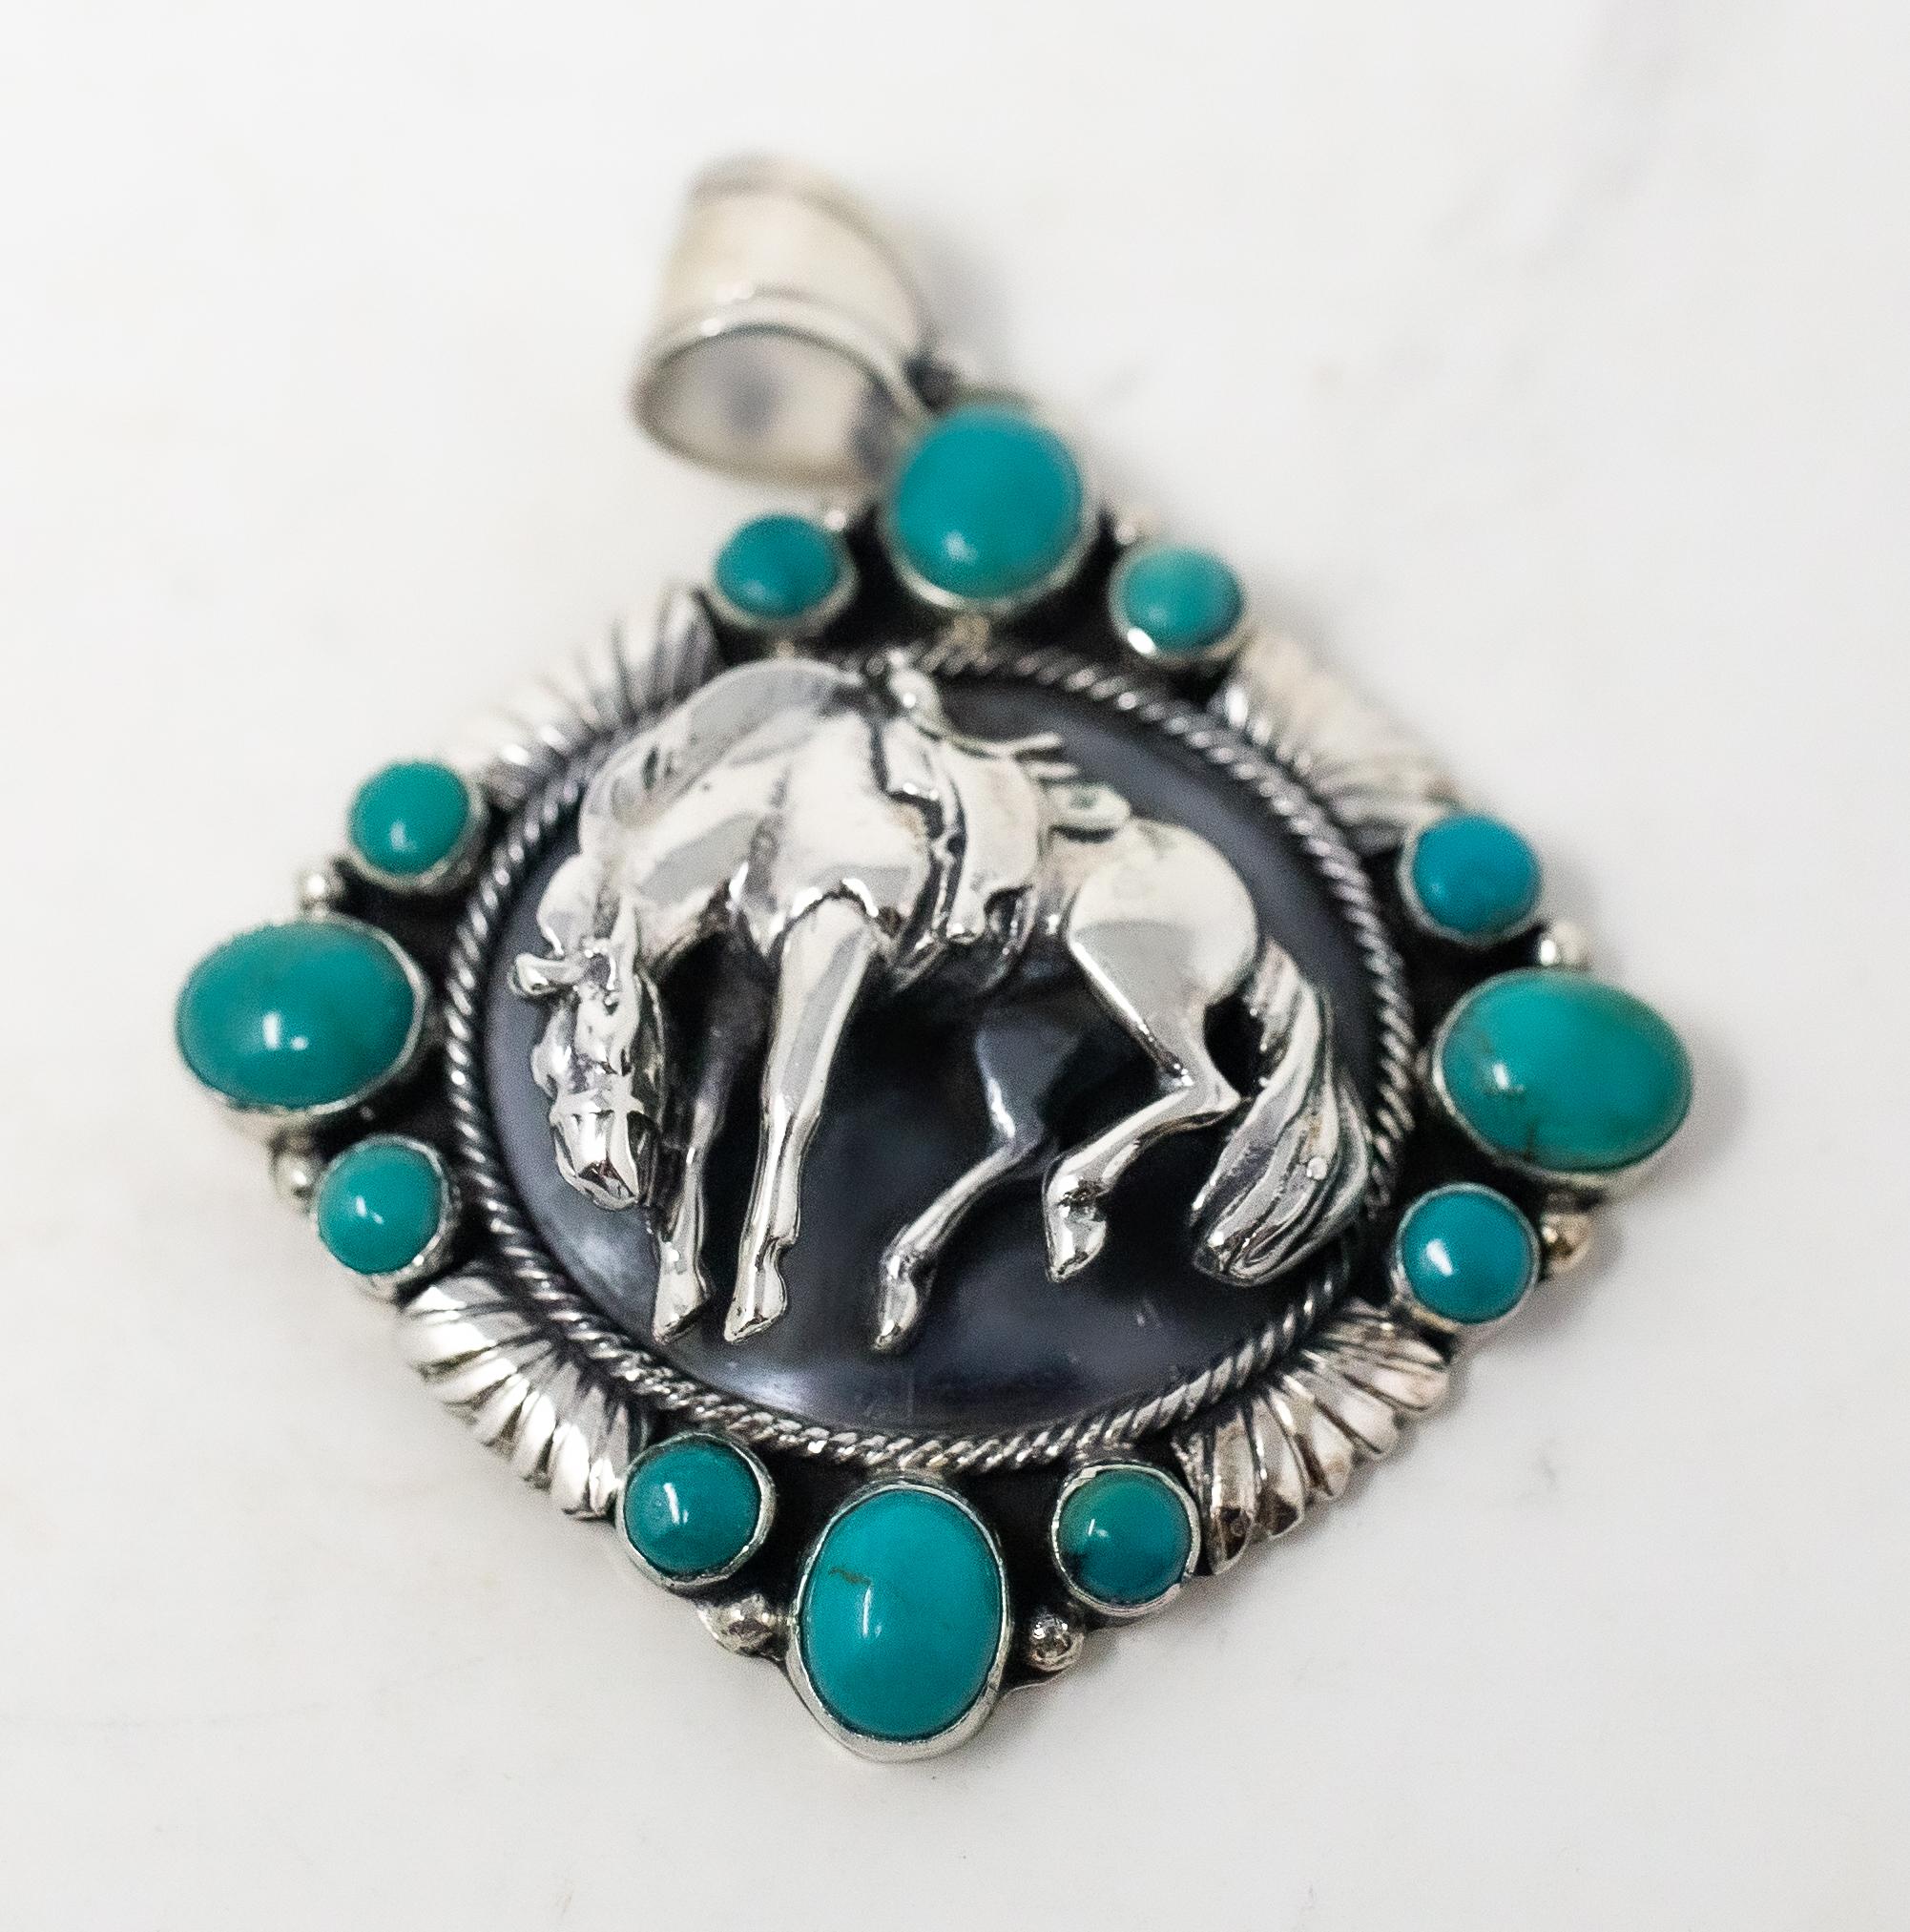 Offering this magnificent Navajo sterling silver horse pendant with turquoise by Emer Thompson. The sterling horse is bucking against a dark background surrounded by a spiral motif. The outer edge has four grouping of turquoise stones in sets of